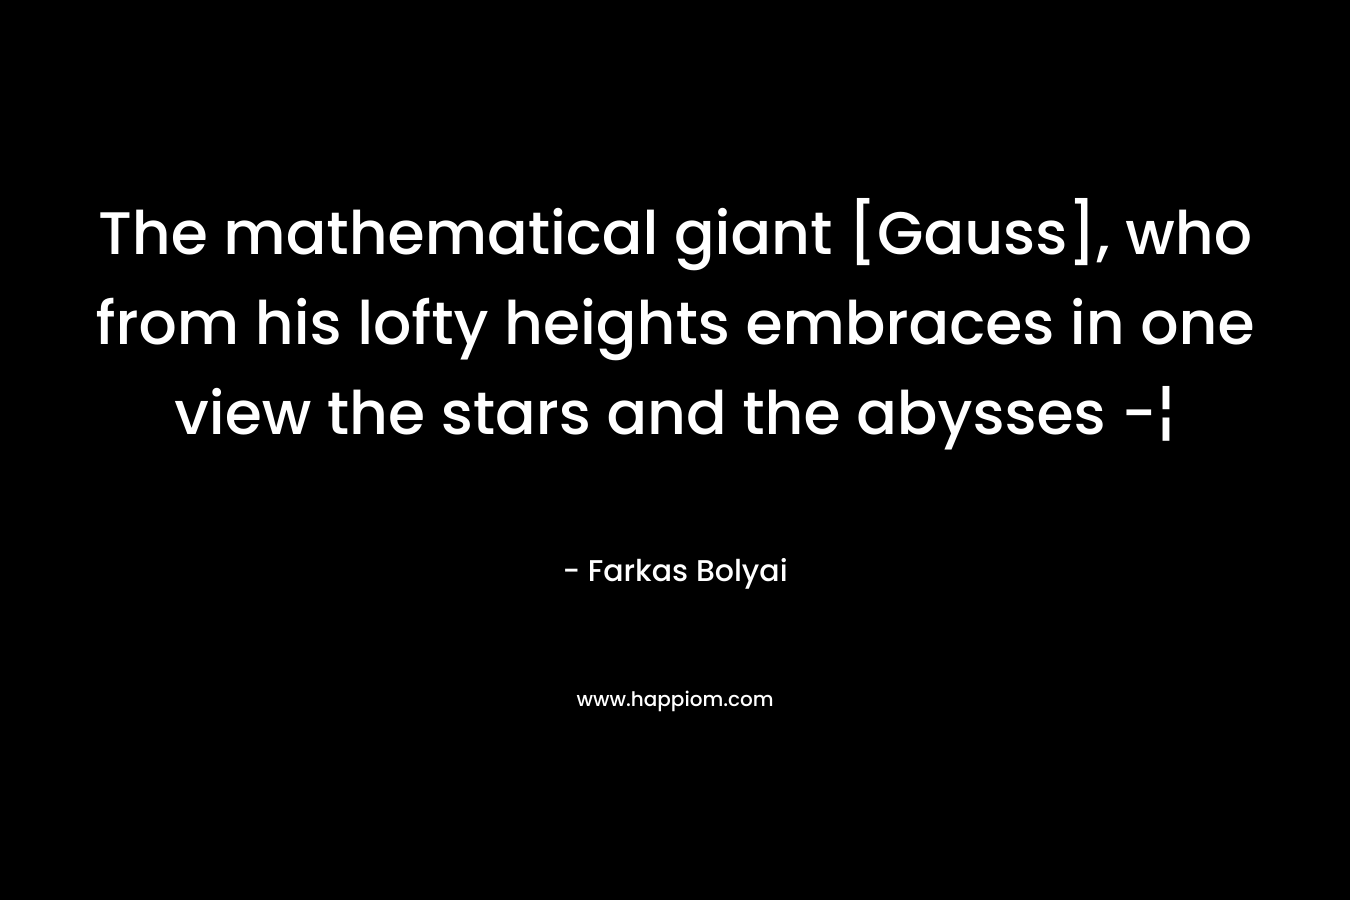 The mathematical giant [Gauss], who from his lofty heights embraces in one view the stars and the abysses -¦